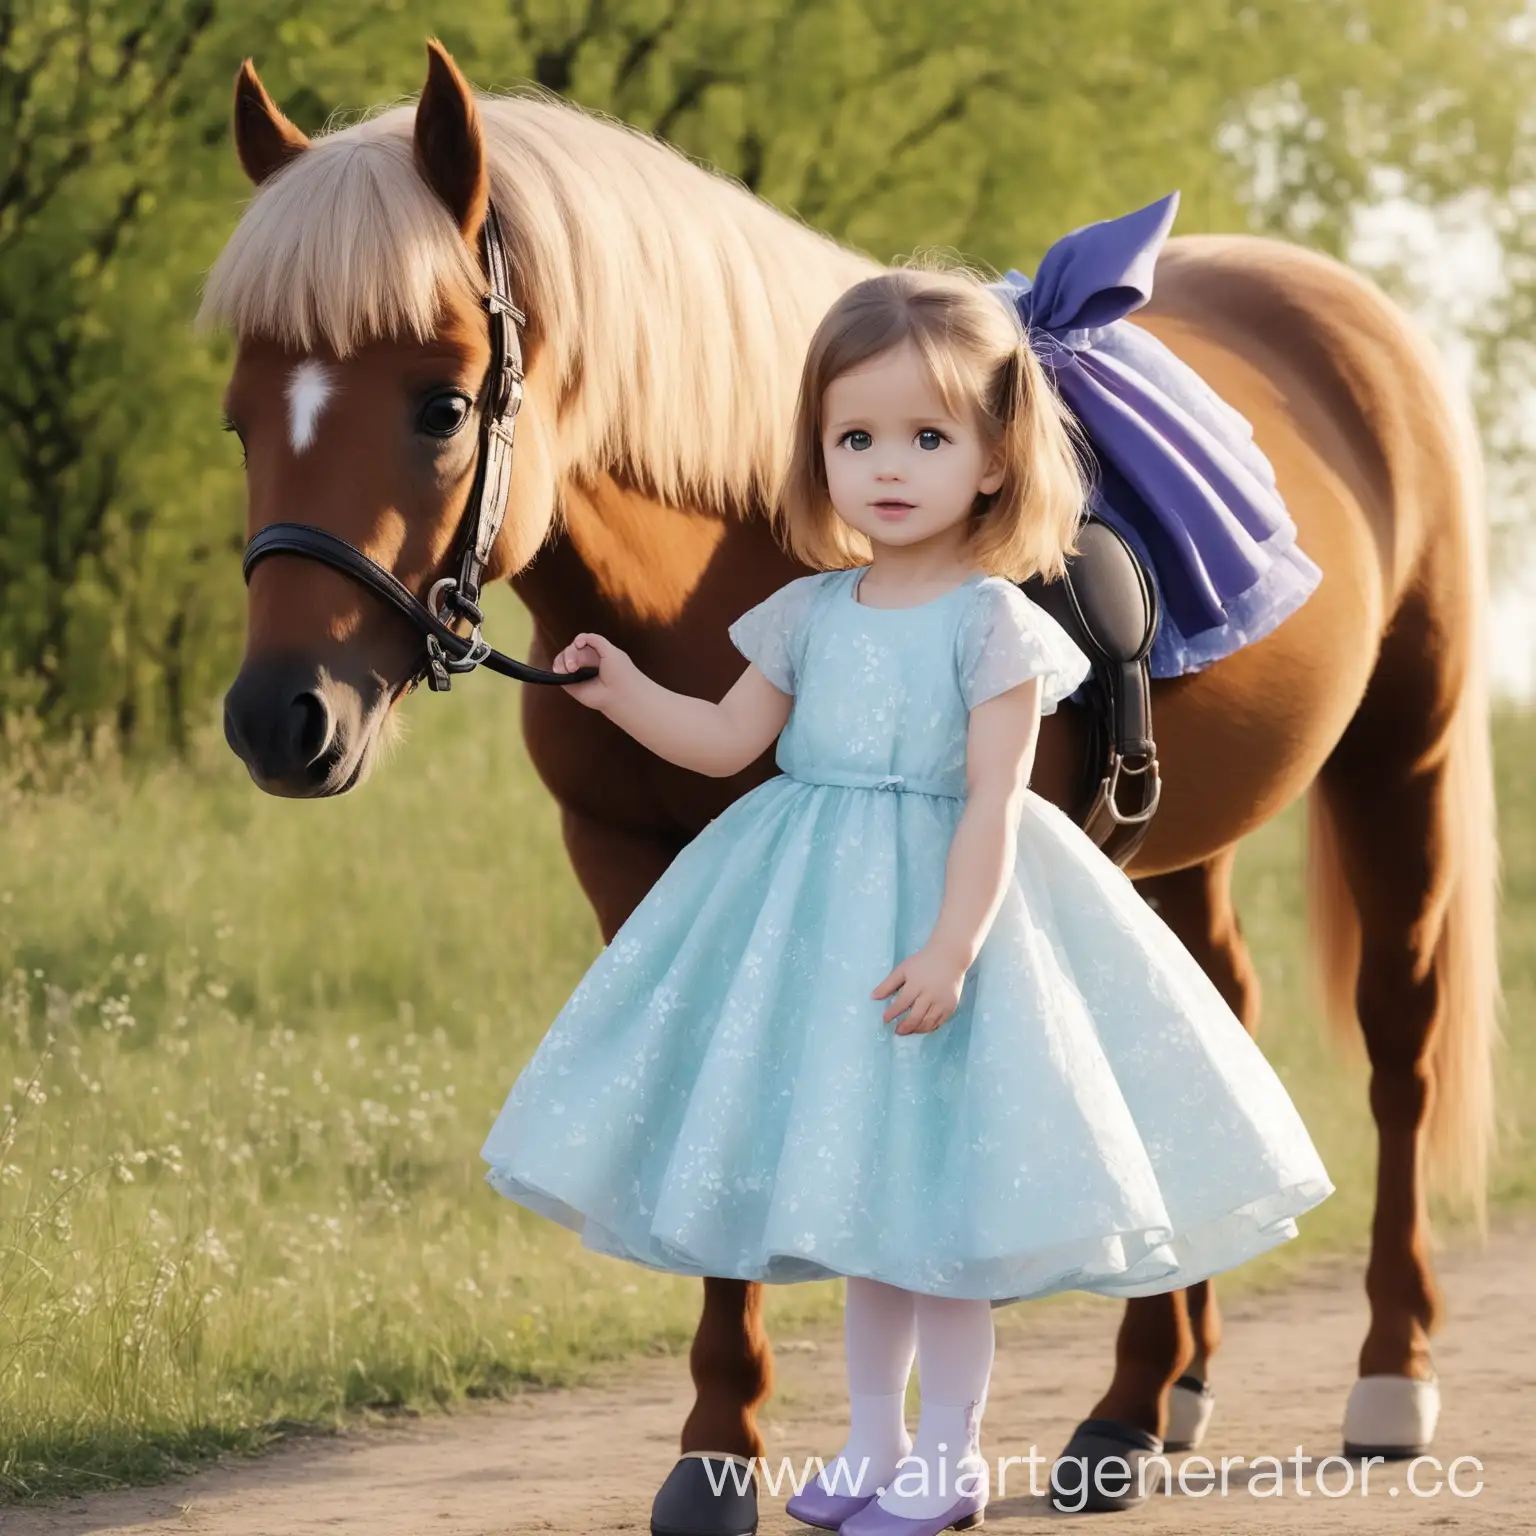 Young-Girl-Riding-Small-Pony-in-Elegant-Dress